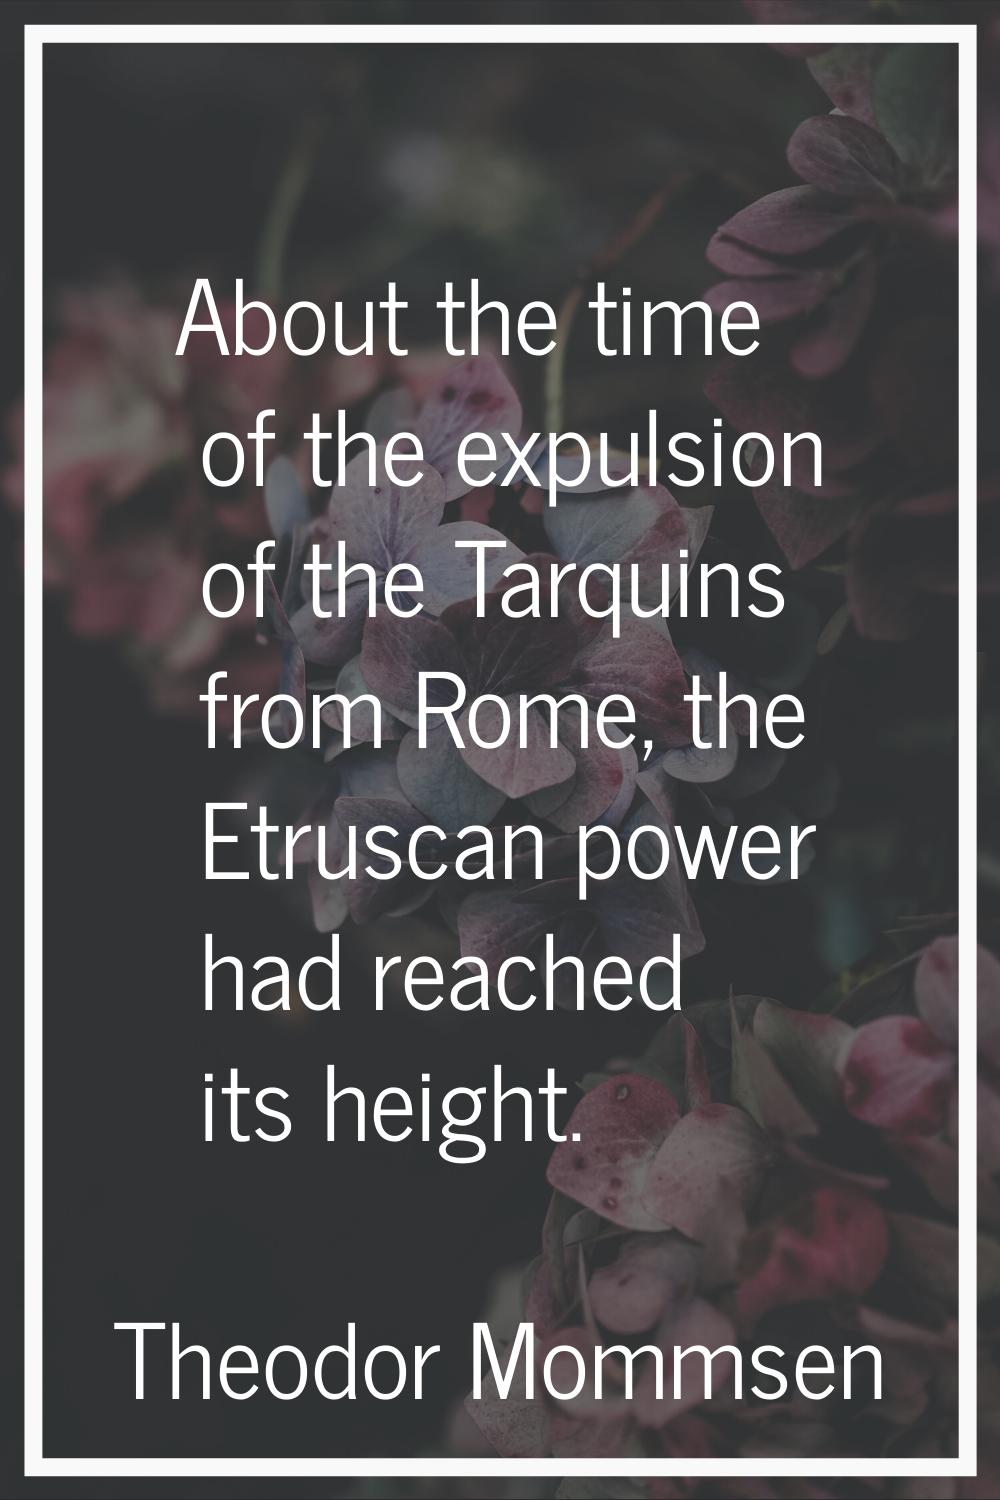 About the time of the expulsion of the Tarquins from Rome, the Etruscan power had reached its heigh